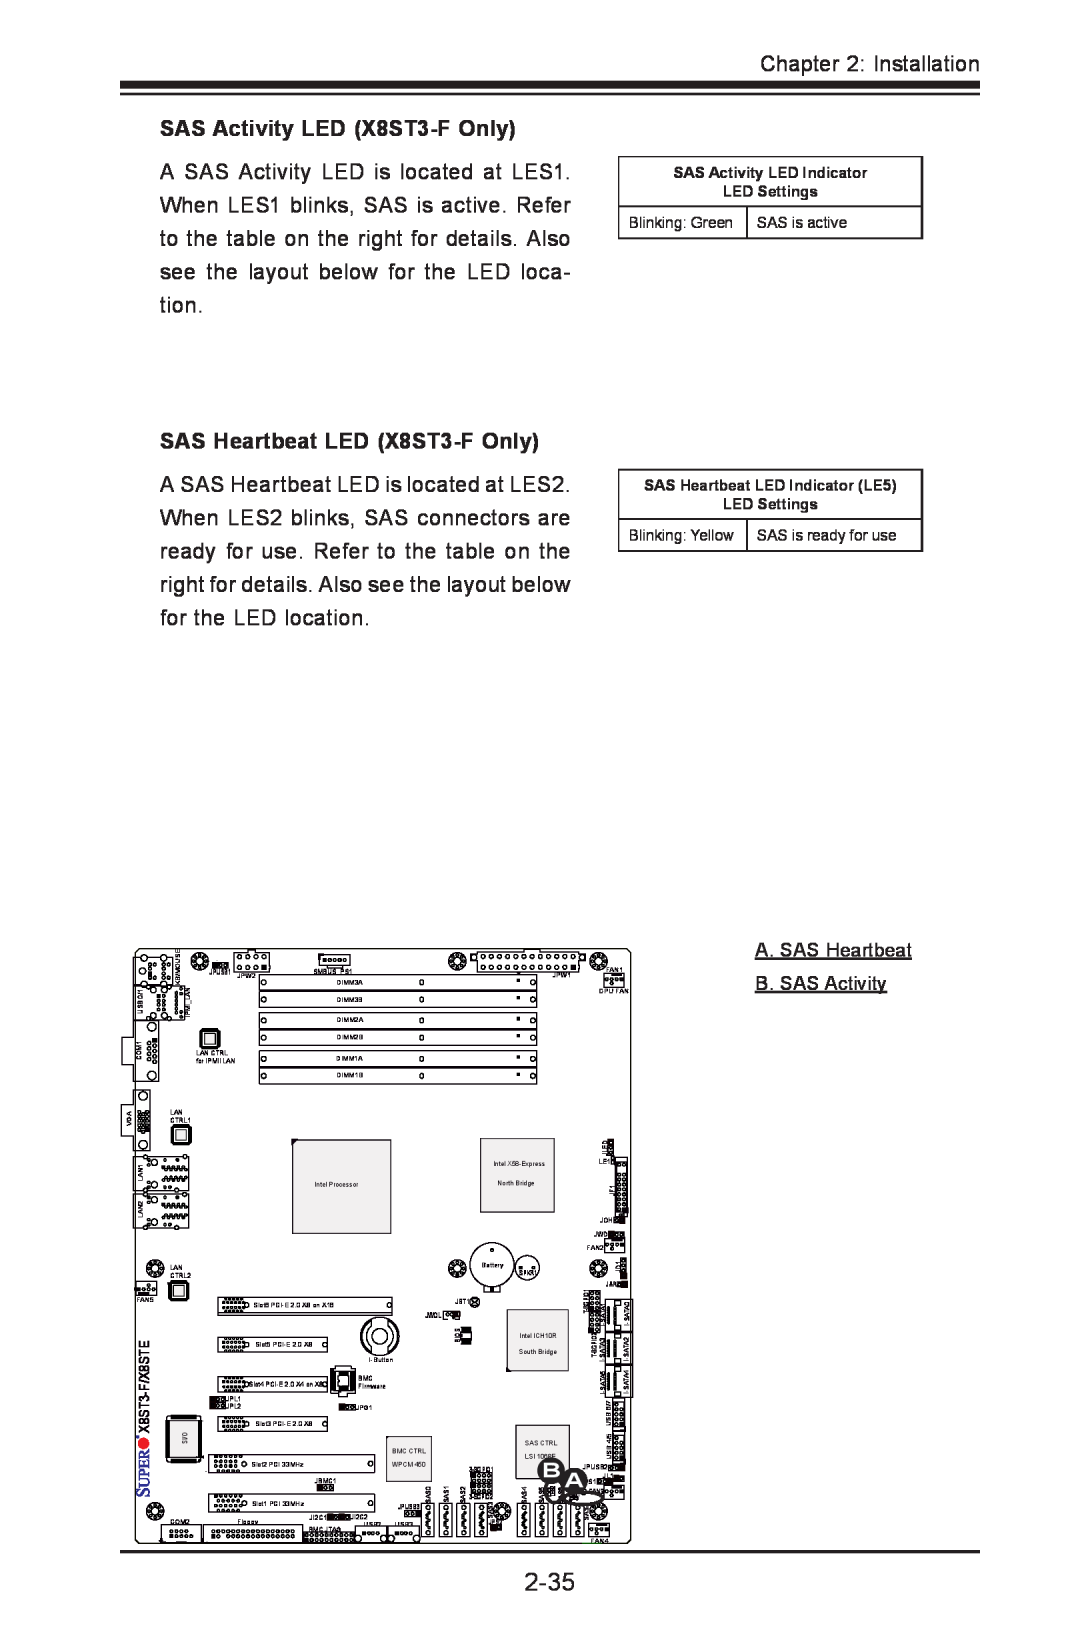 SUPER MICRO Computer X8STE user manual 2-35, SAS Activity LED X8ST3-F Only, SAS Heartbeat LED X8ST3-F Only 